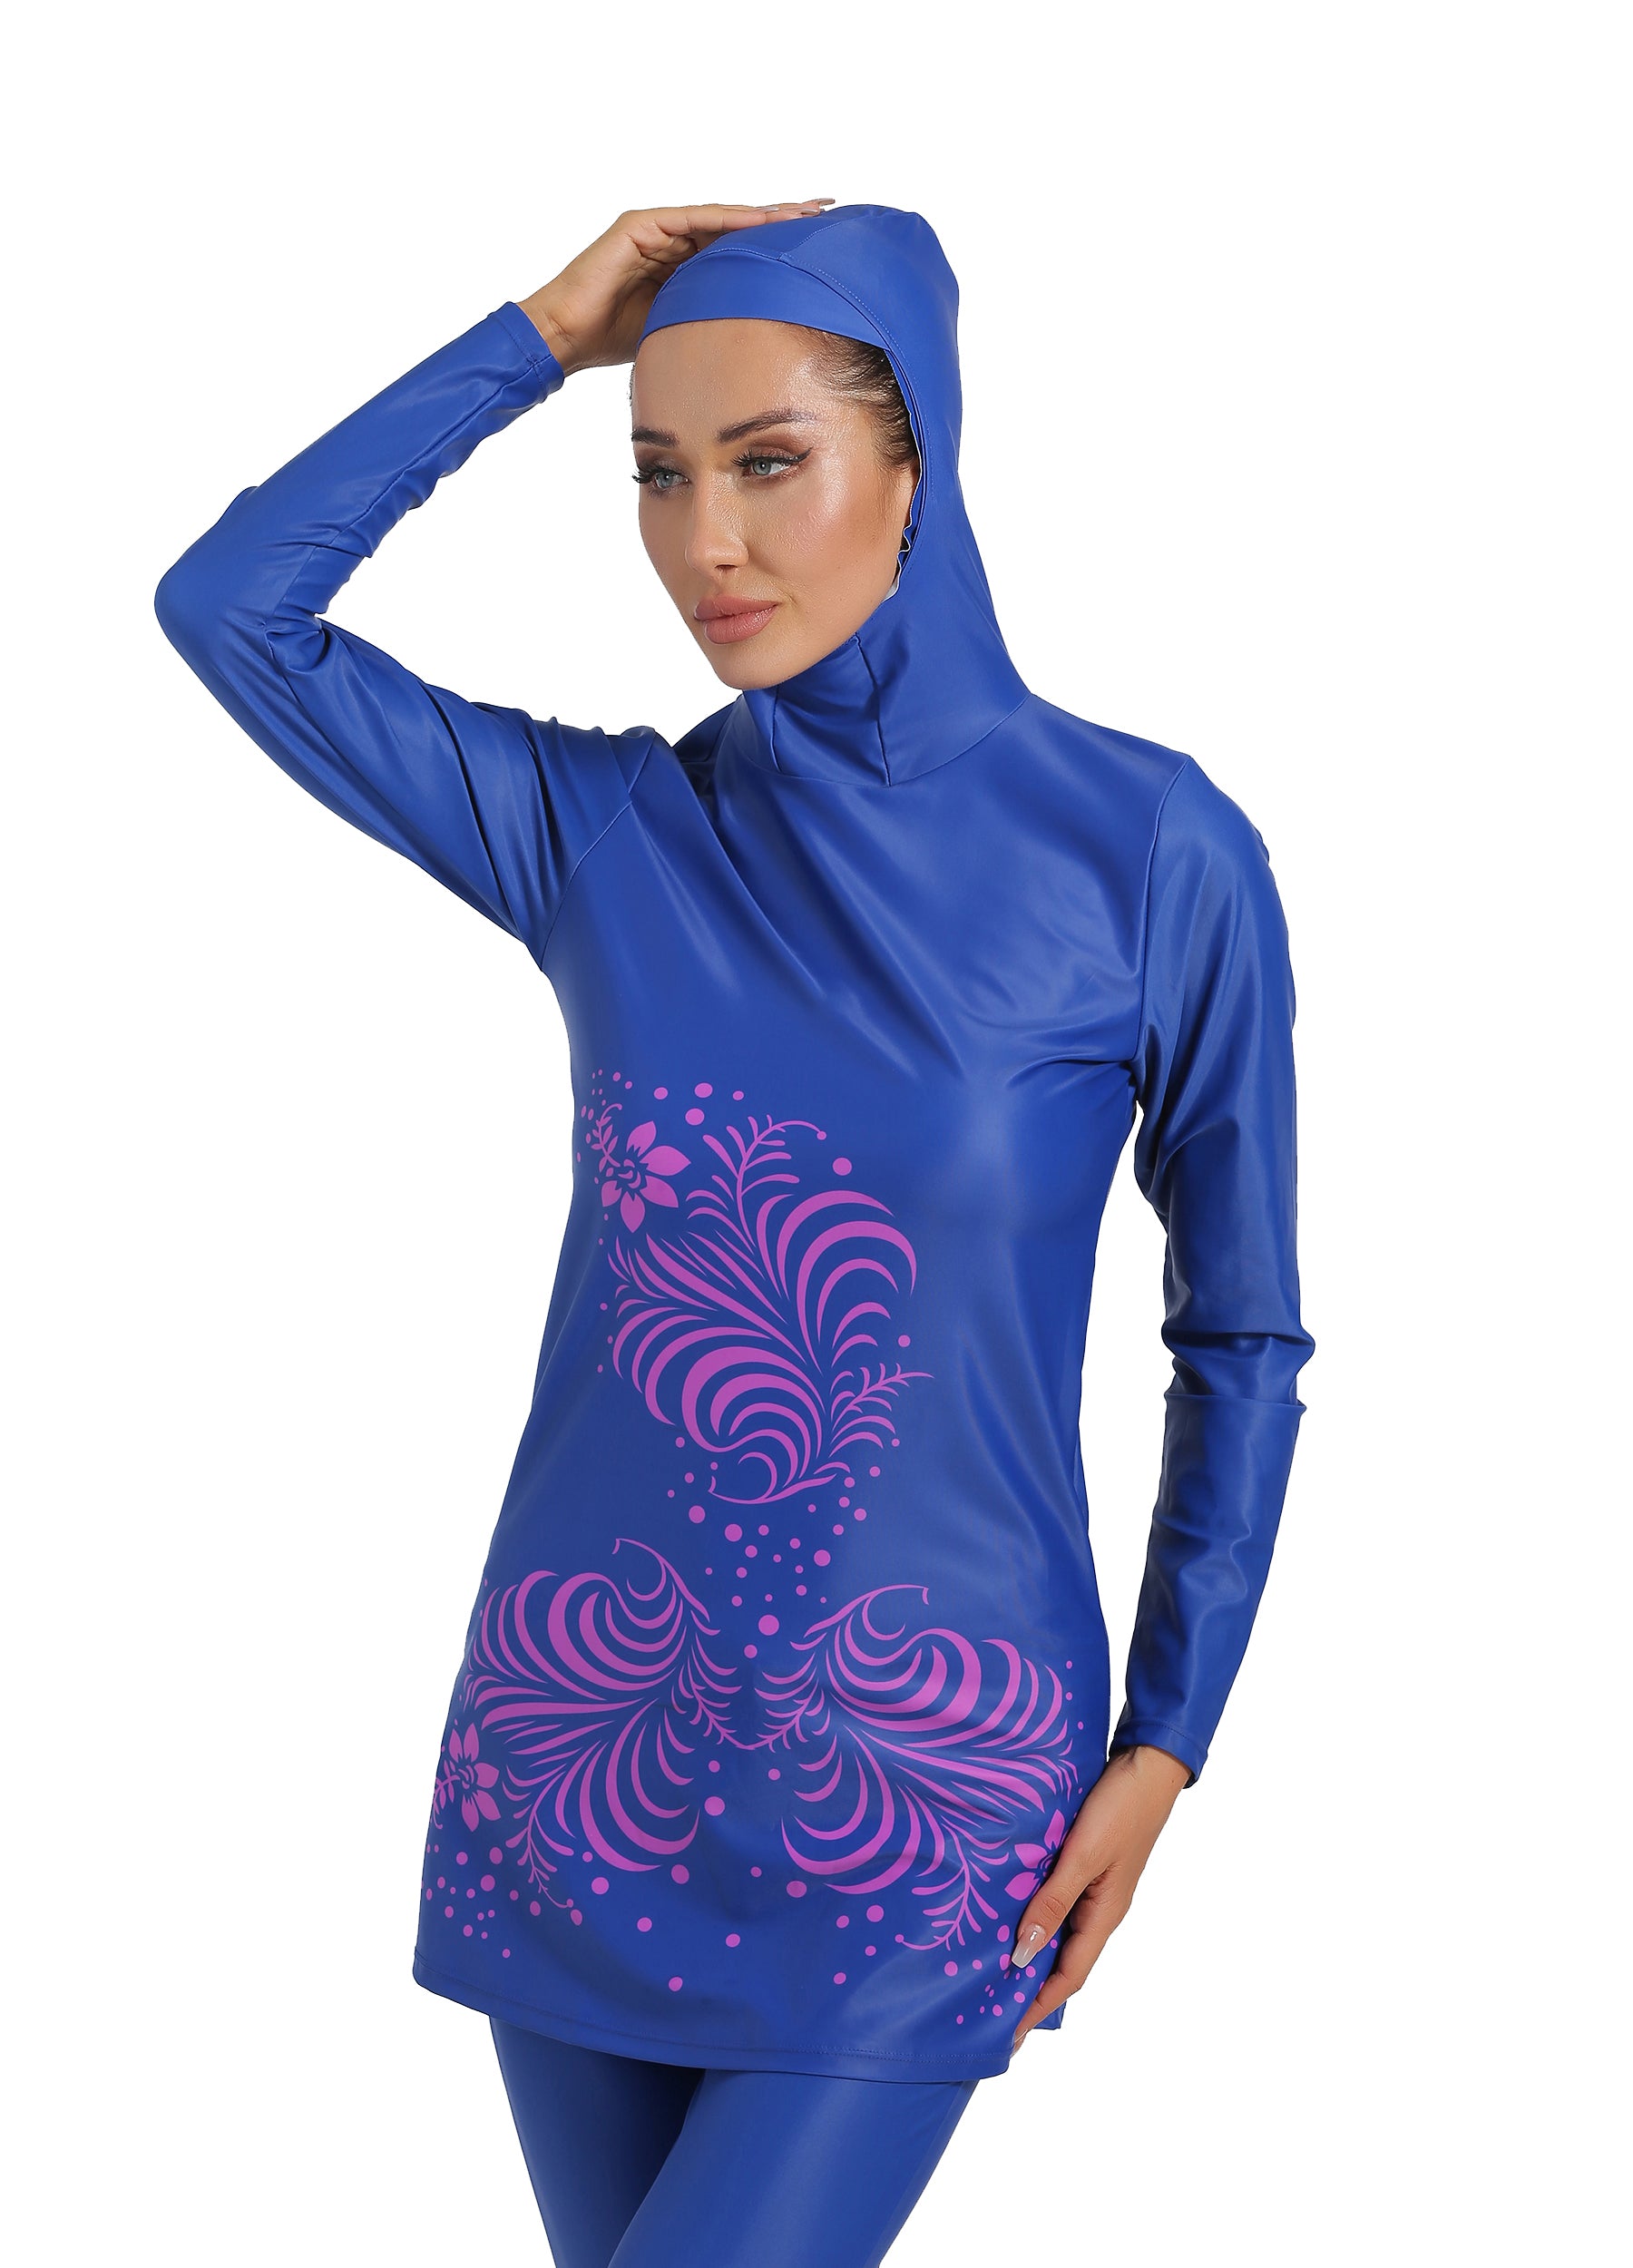 muslim swimming suits/islamic swimming suits/4POSE Women's Floral Print Modest Muslim Full Coverage Hijab Swimsuit-Blue